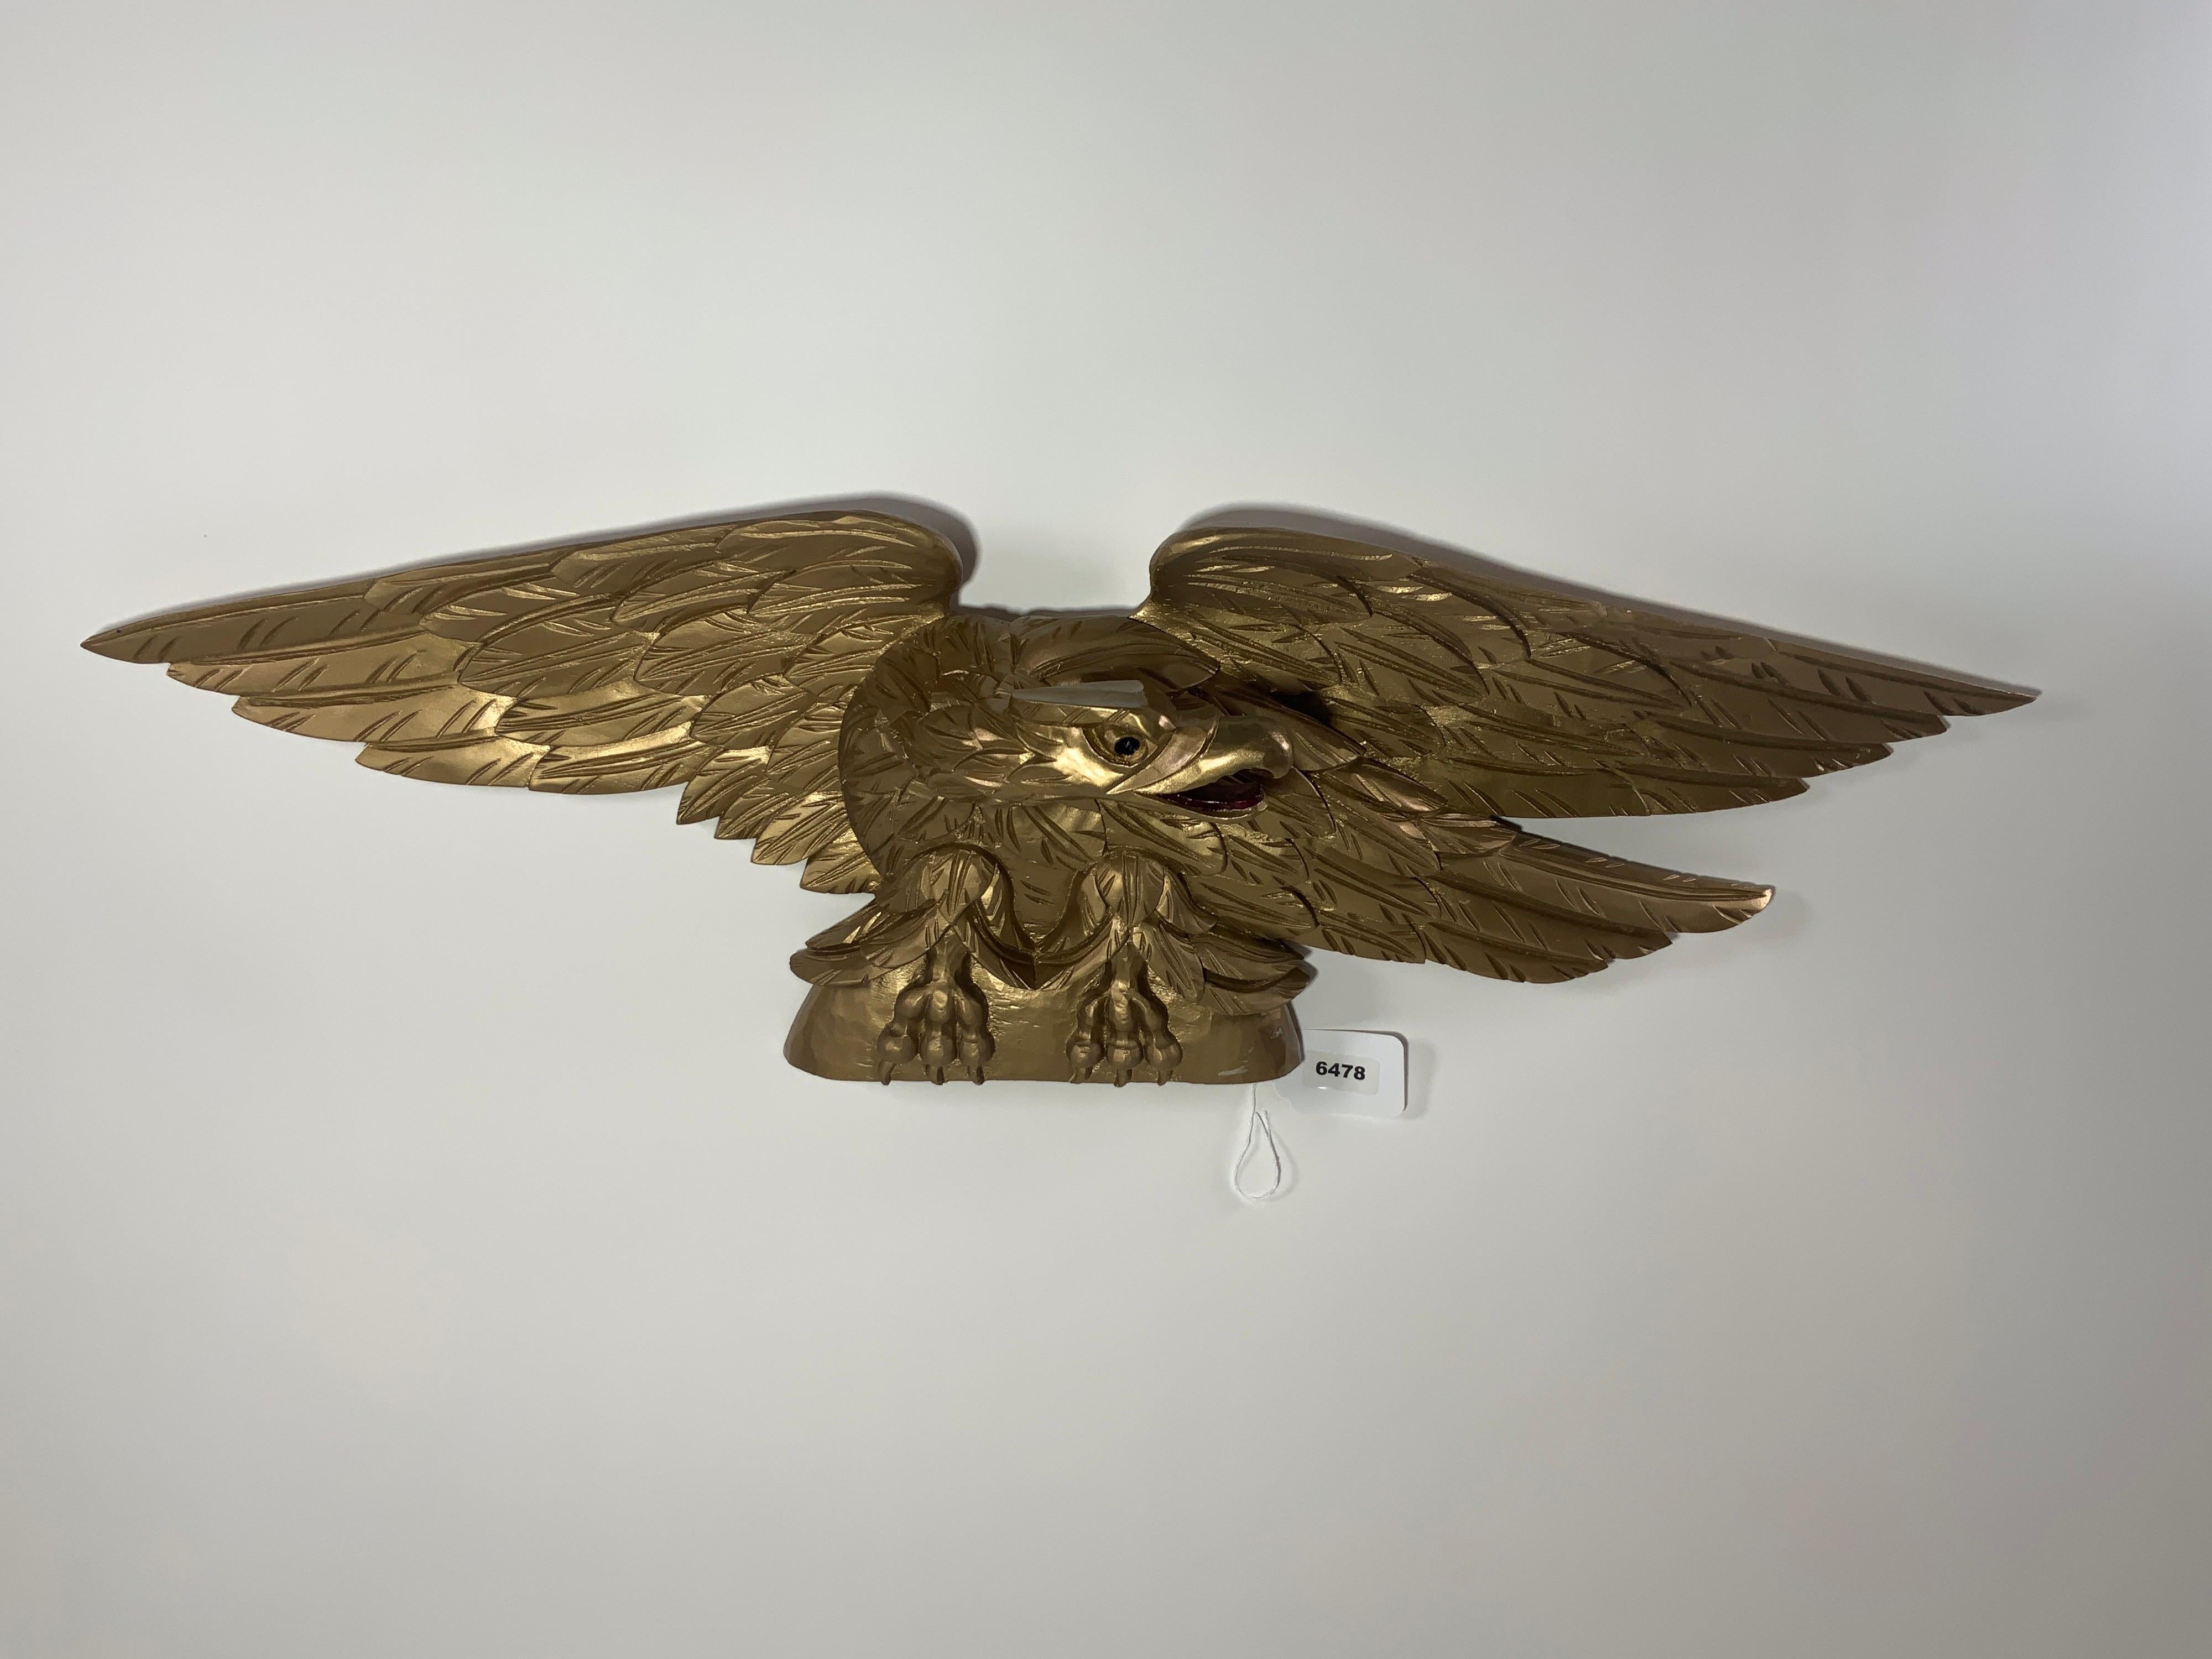 Carved eagle with pediment base. Heavily carved wings. Expertly executed. Flat bottom. Can be displayed on a mantle, over a door, or hung. Old gold painted finish.

Overall Dimensions: 11